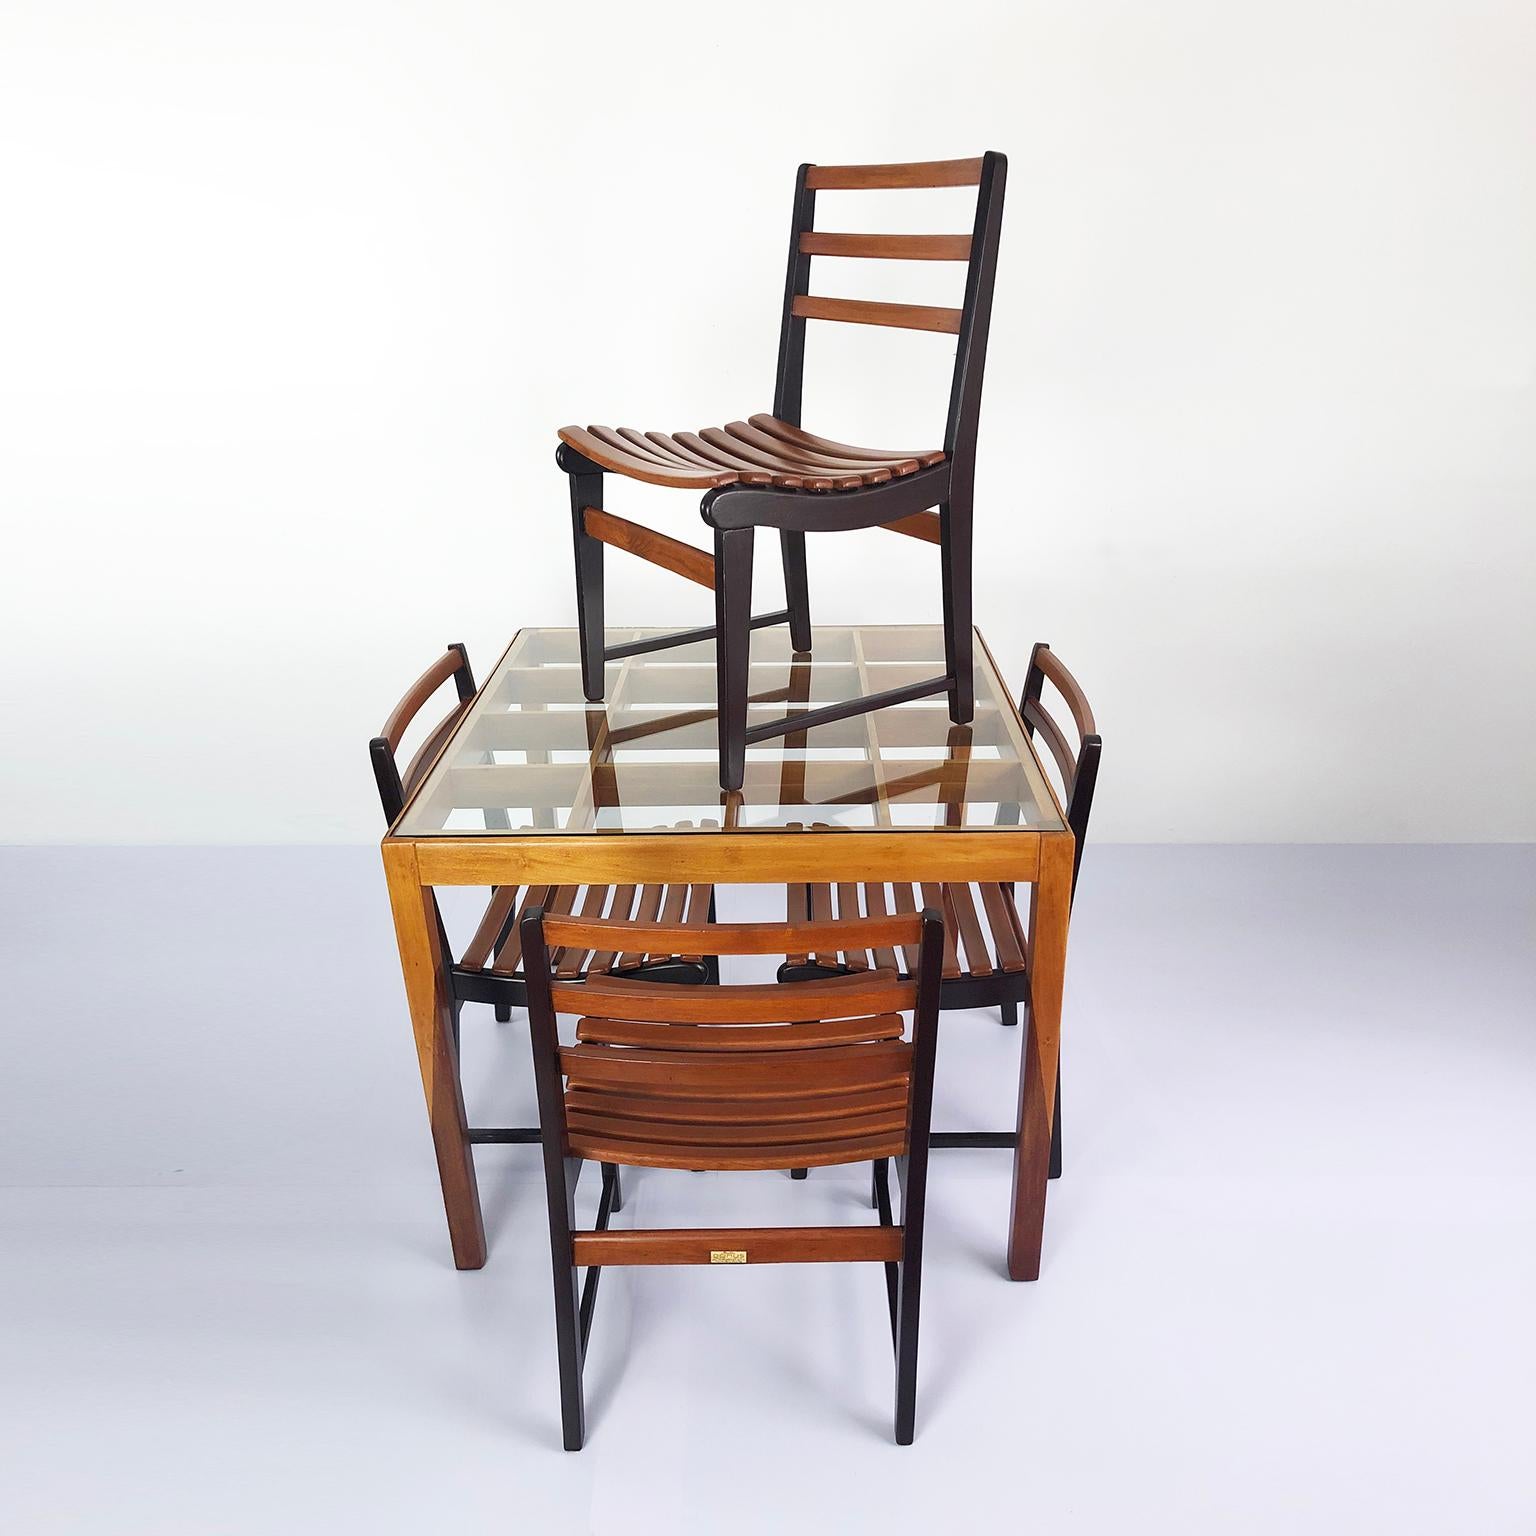 We offer this rare and original Domus dinning set (Table and 4 chairs) in pine wood and with the characteristic Van Beuren color, designed by the American Bauhaus designer, Michael Van Beuren in Mexico, circa 1950, this handmade, solid pine wood